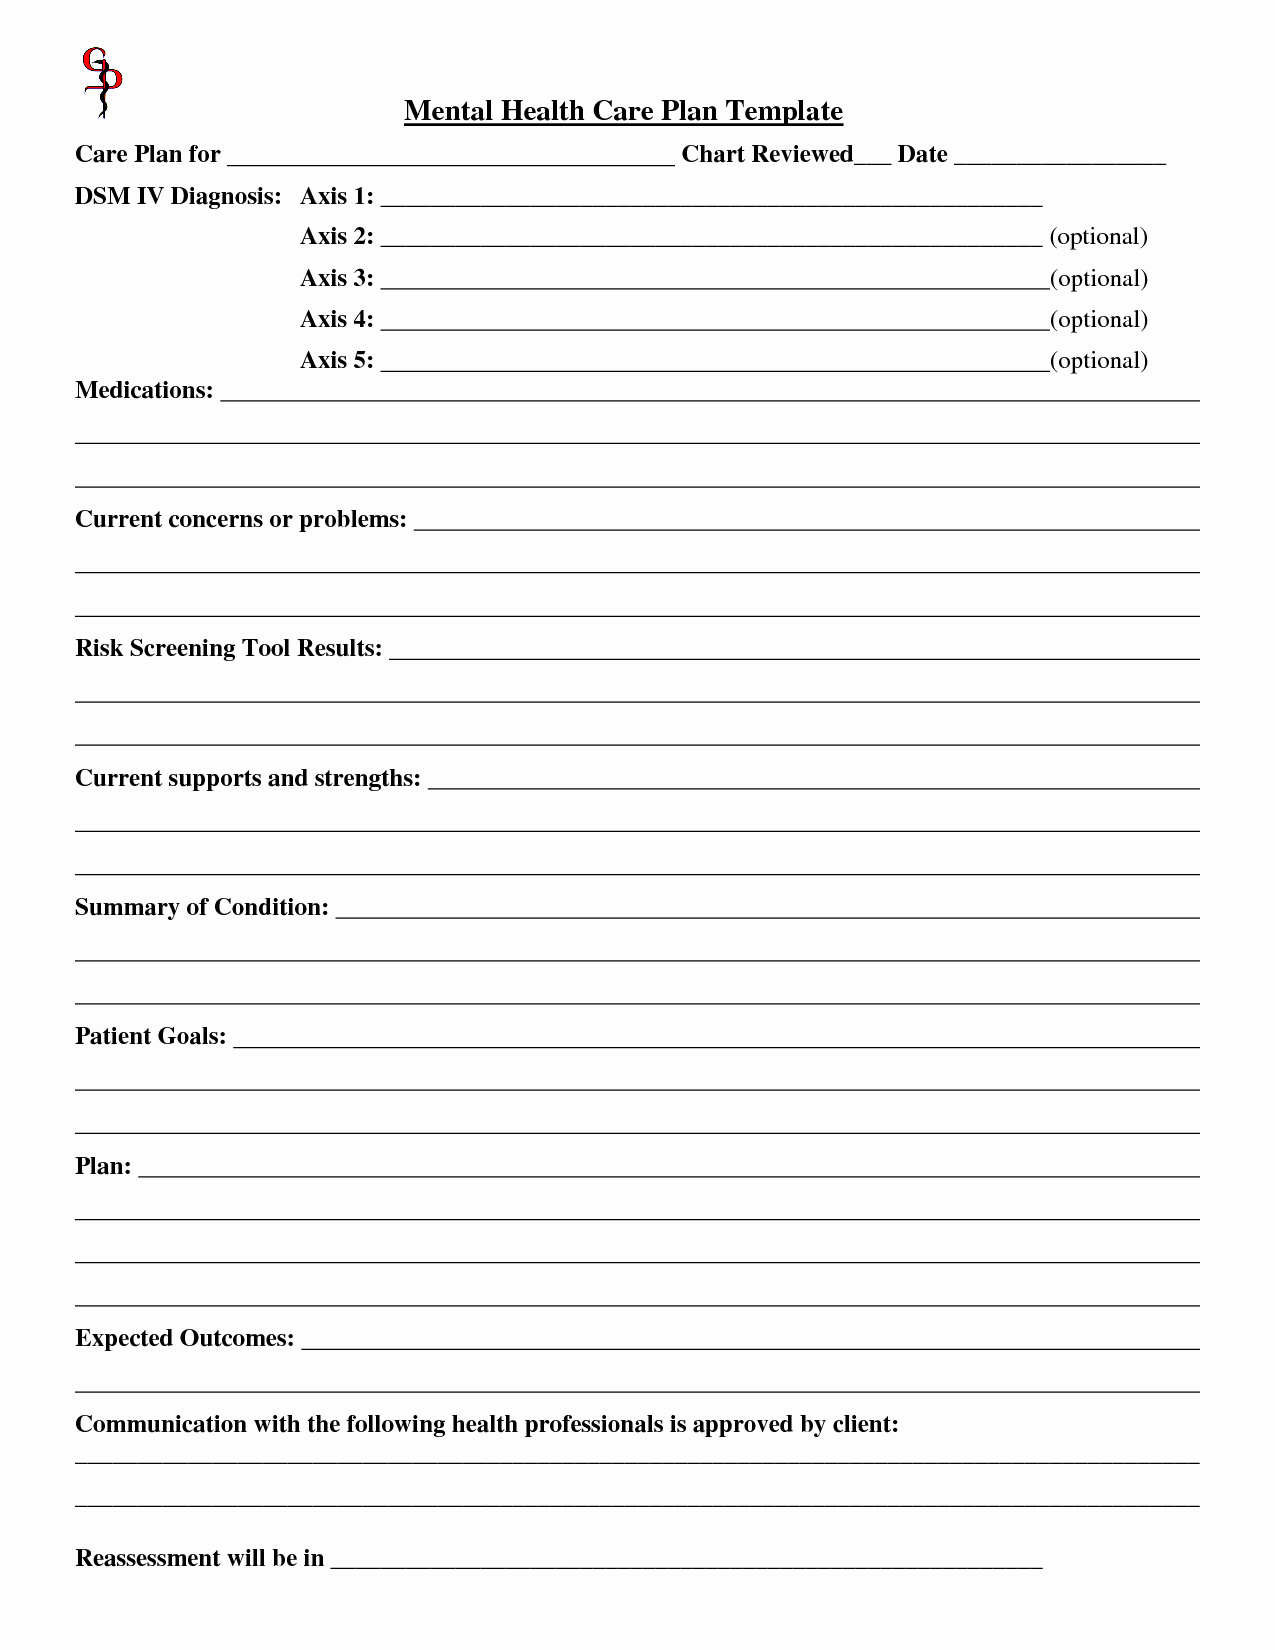 Mental Health Crisis Plan Template Awesome Best S Of Health Care forms Templates Mental Health